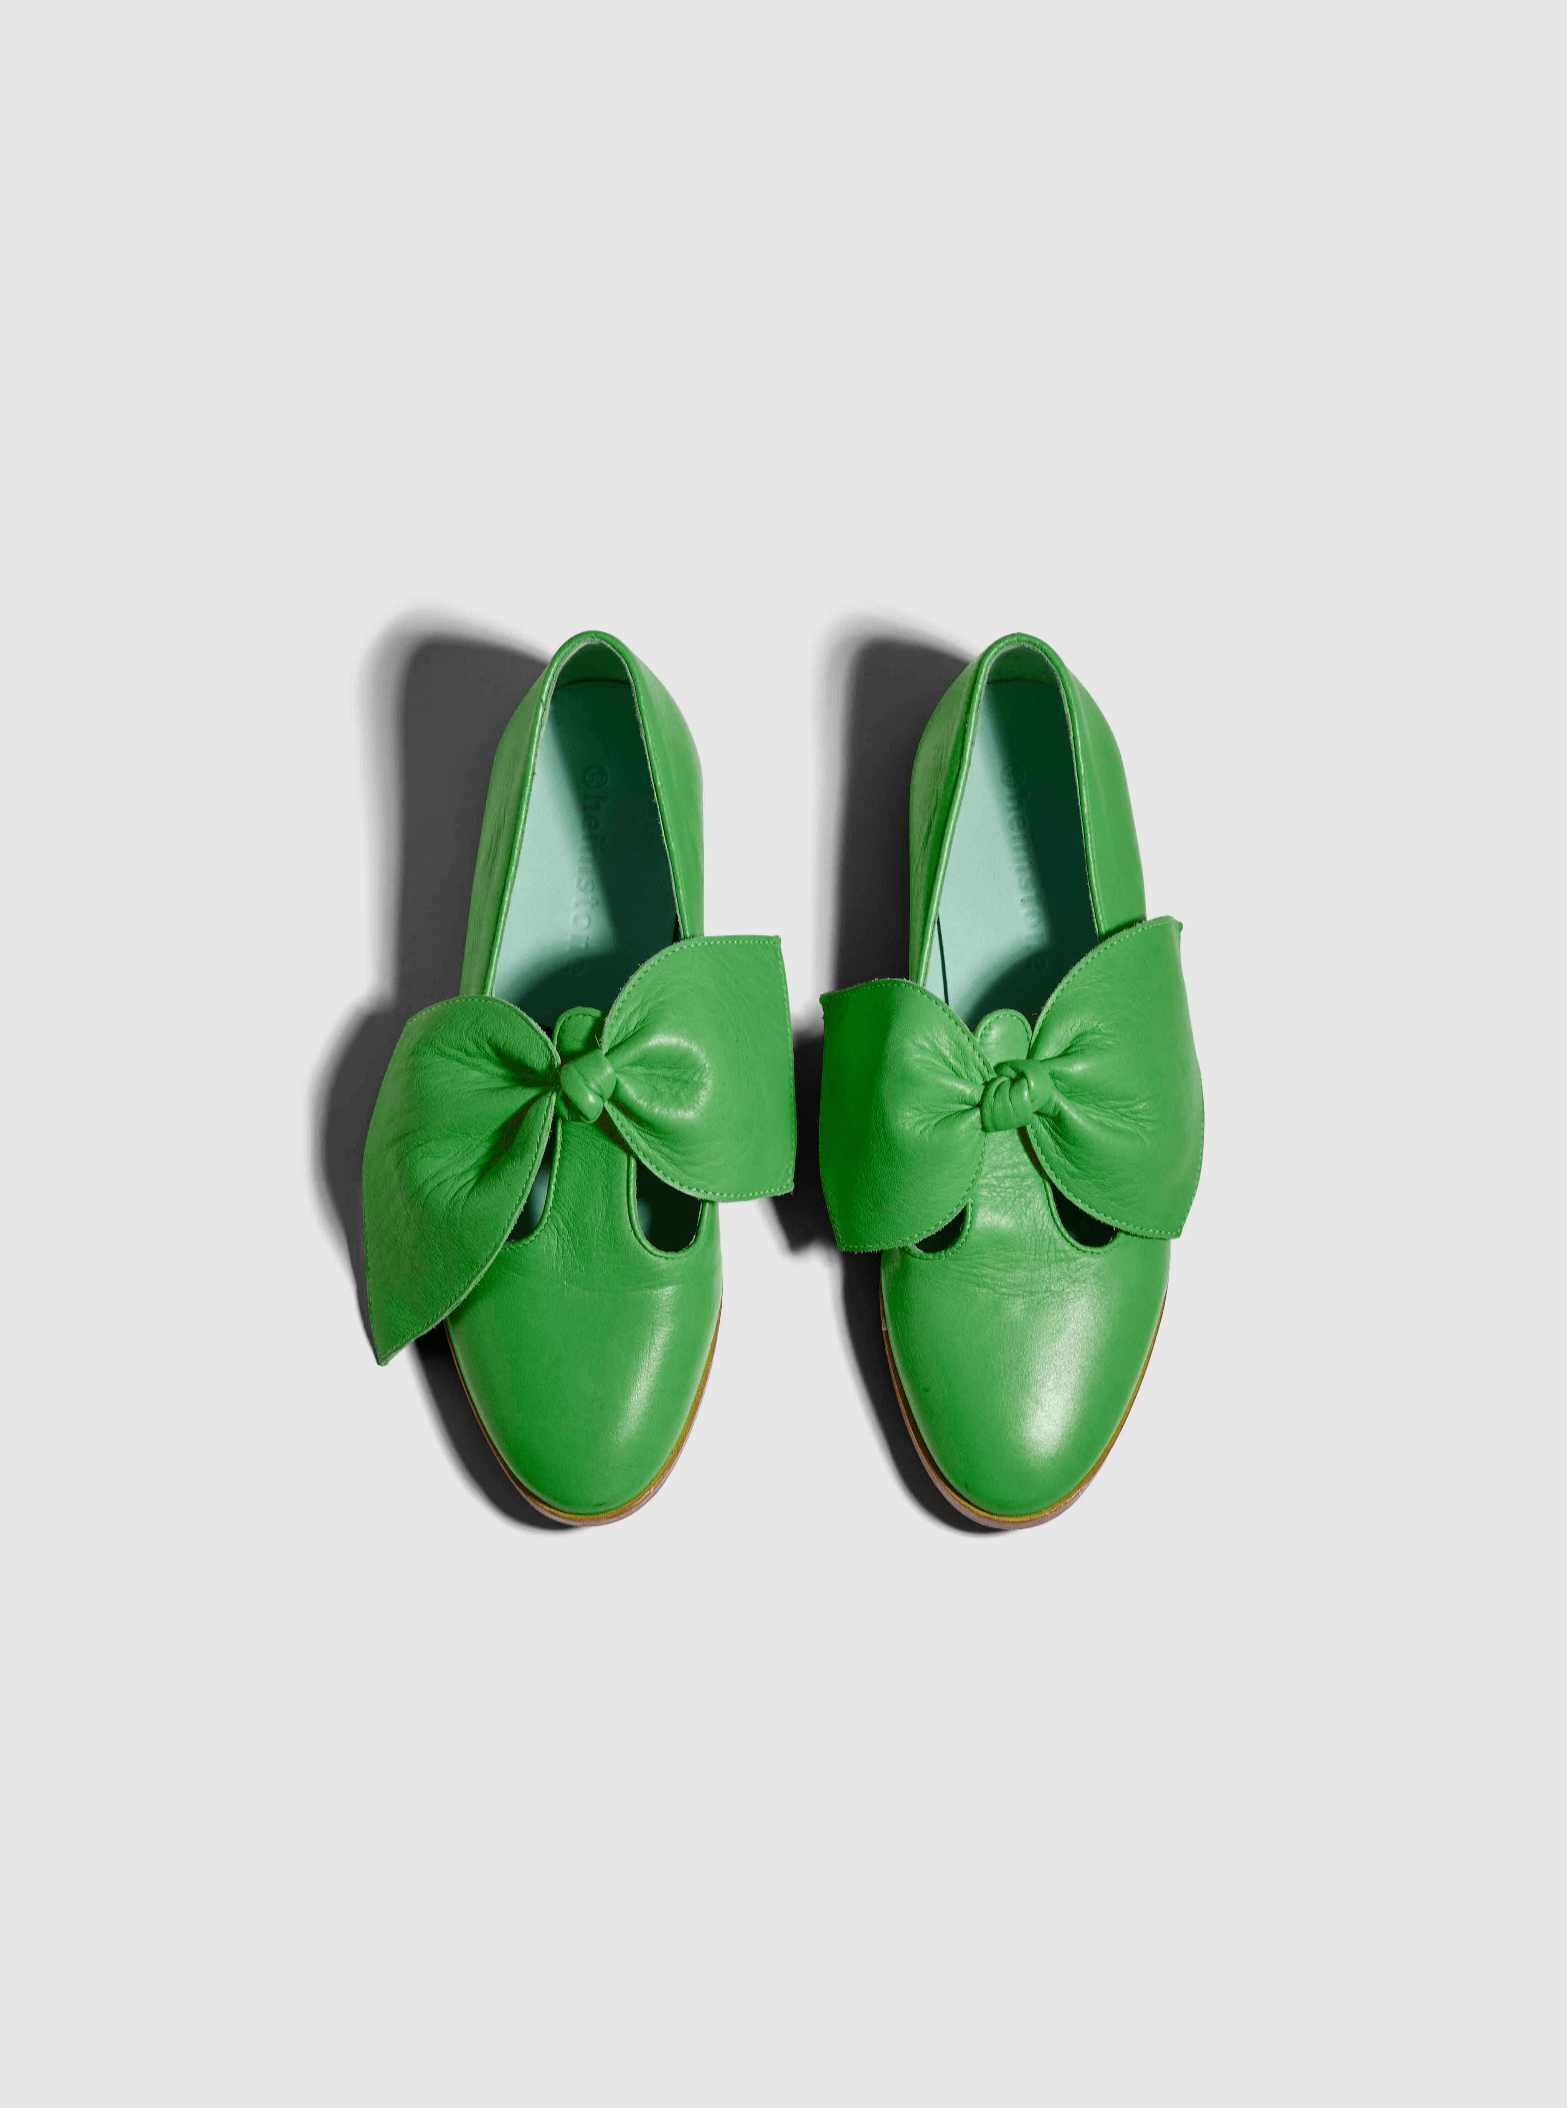 BB Ballerina Shoes in Green Leather